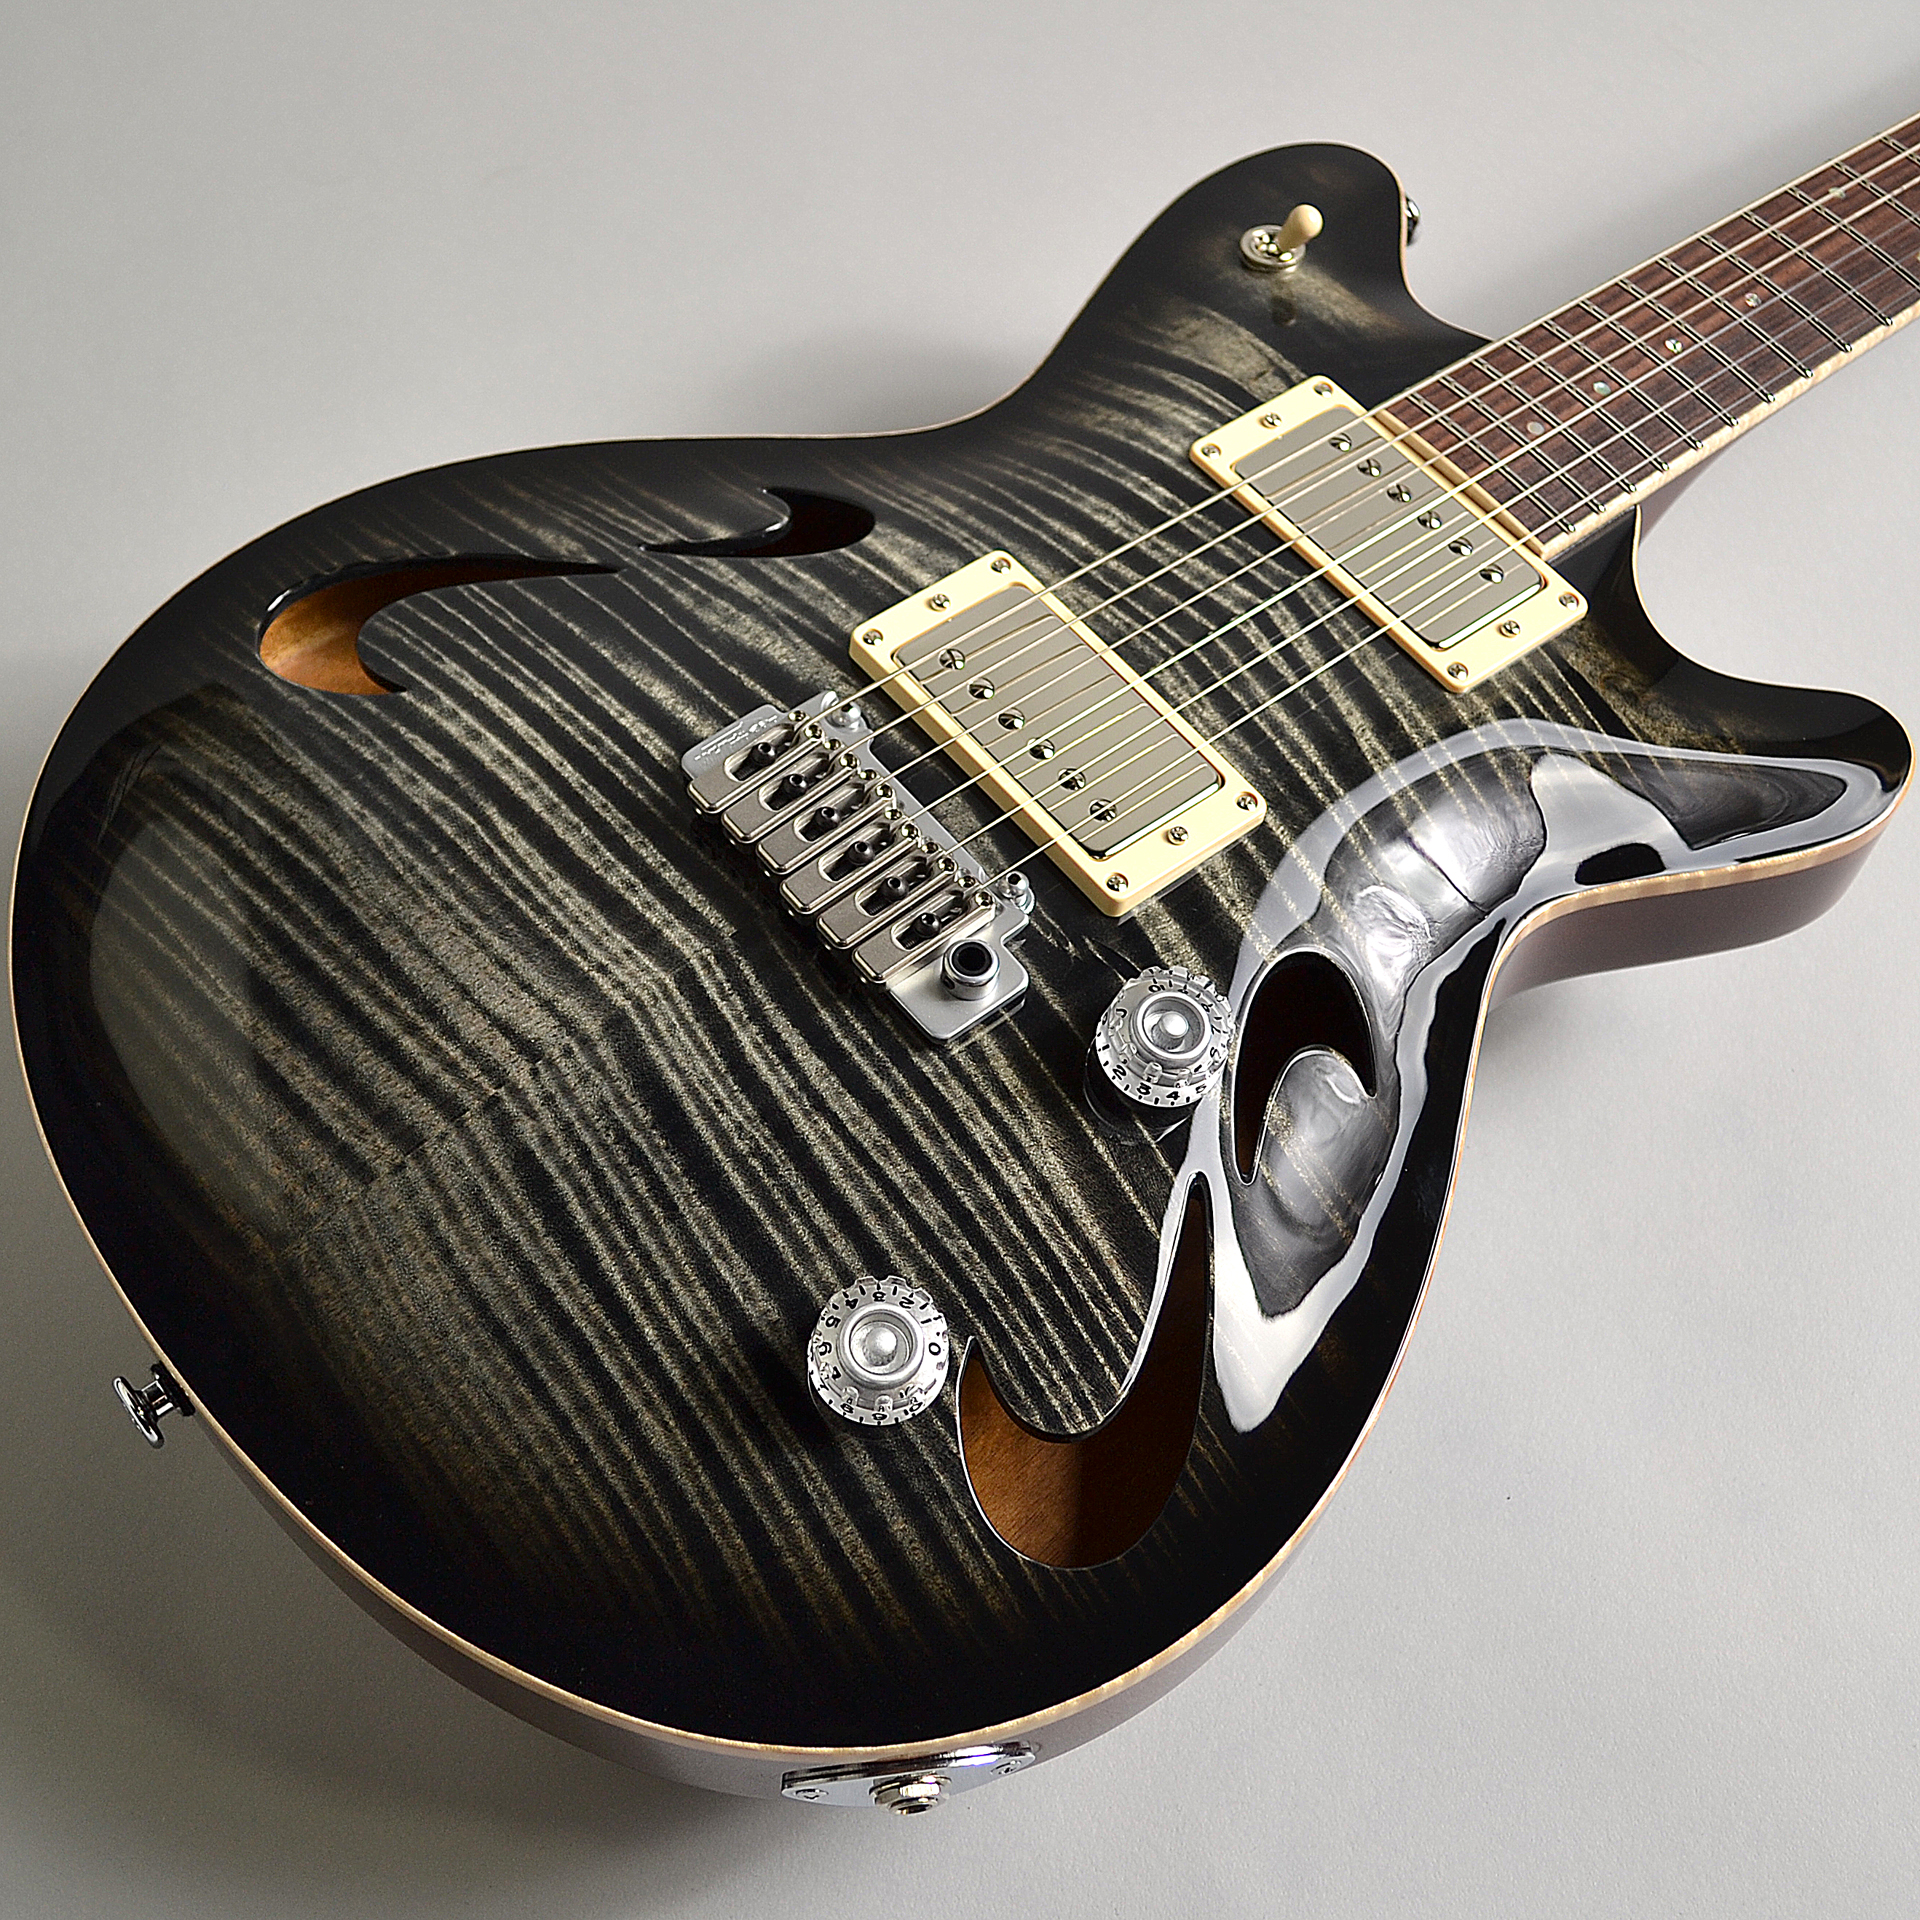 Sold】T'sguitars Arc-Hollow Stainlessショップオーダー情報｜島村